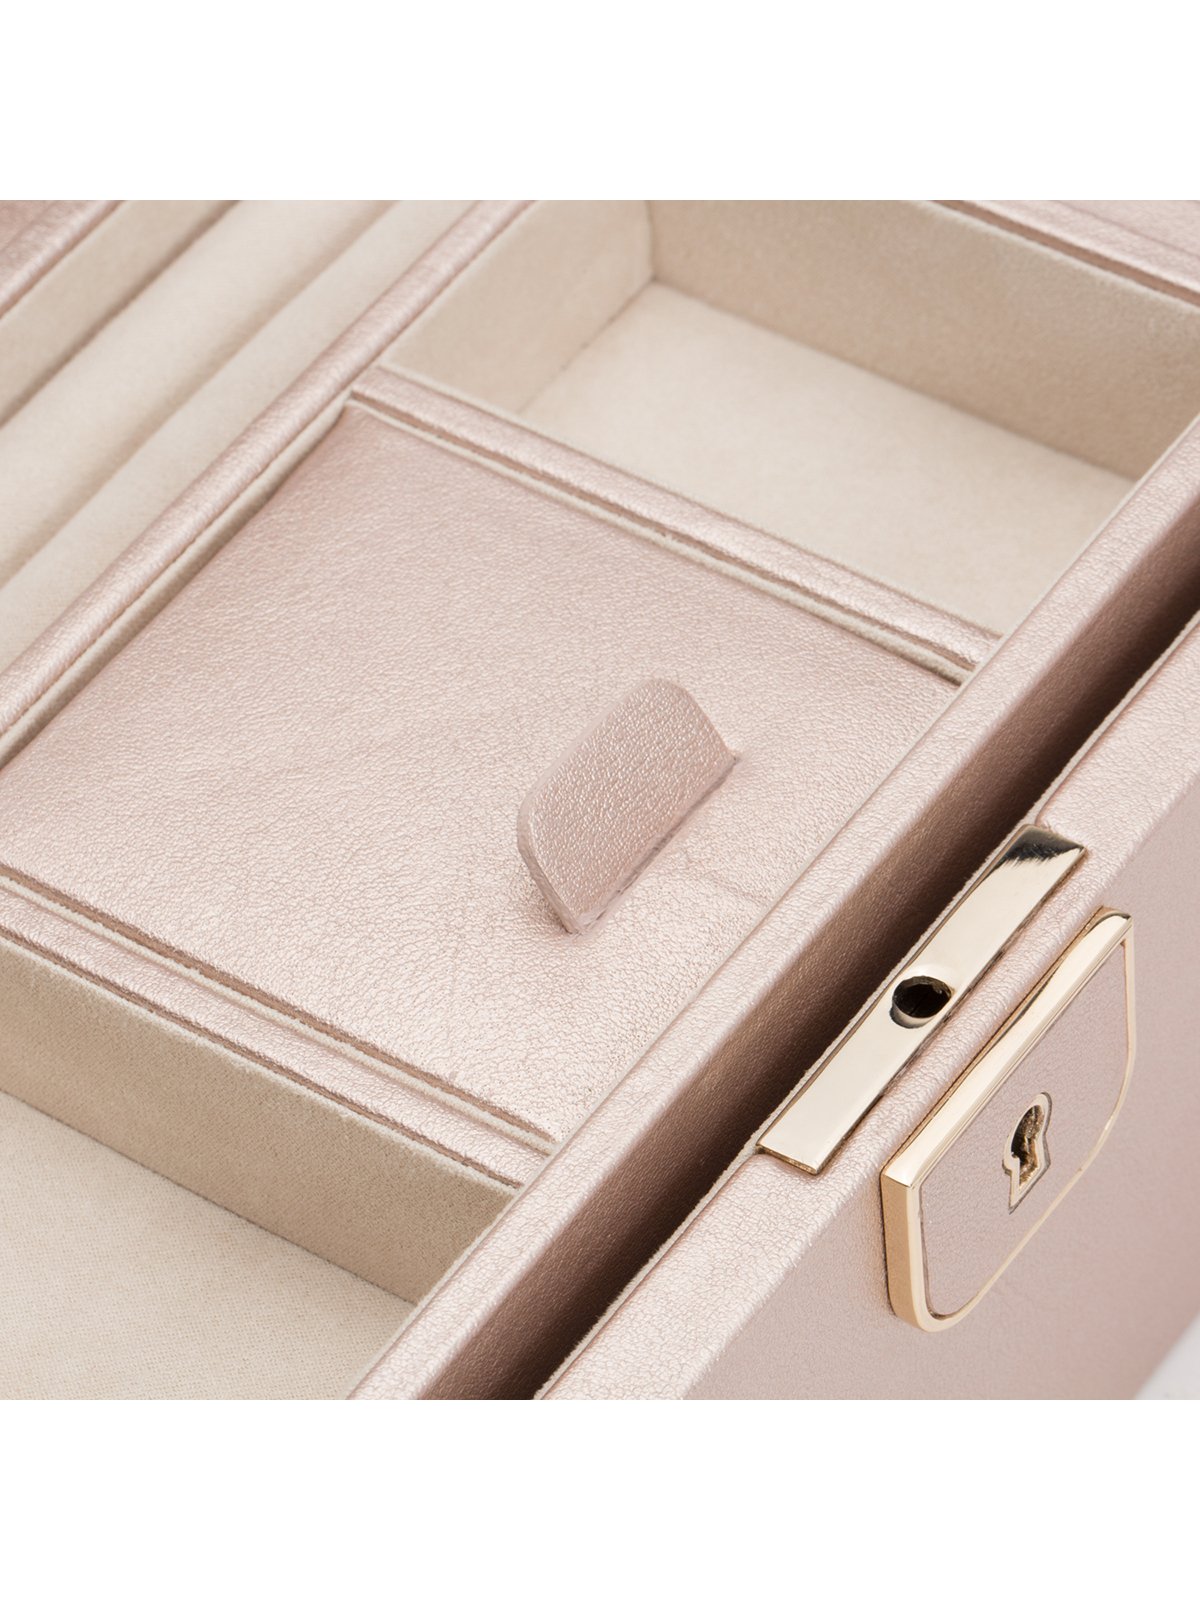 Wolf Palermo Small Jewellery Box in Rose Gold 213116